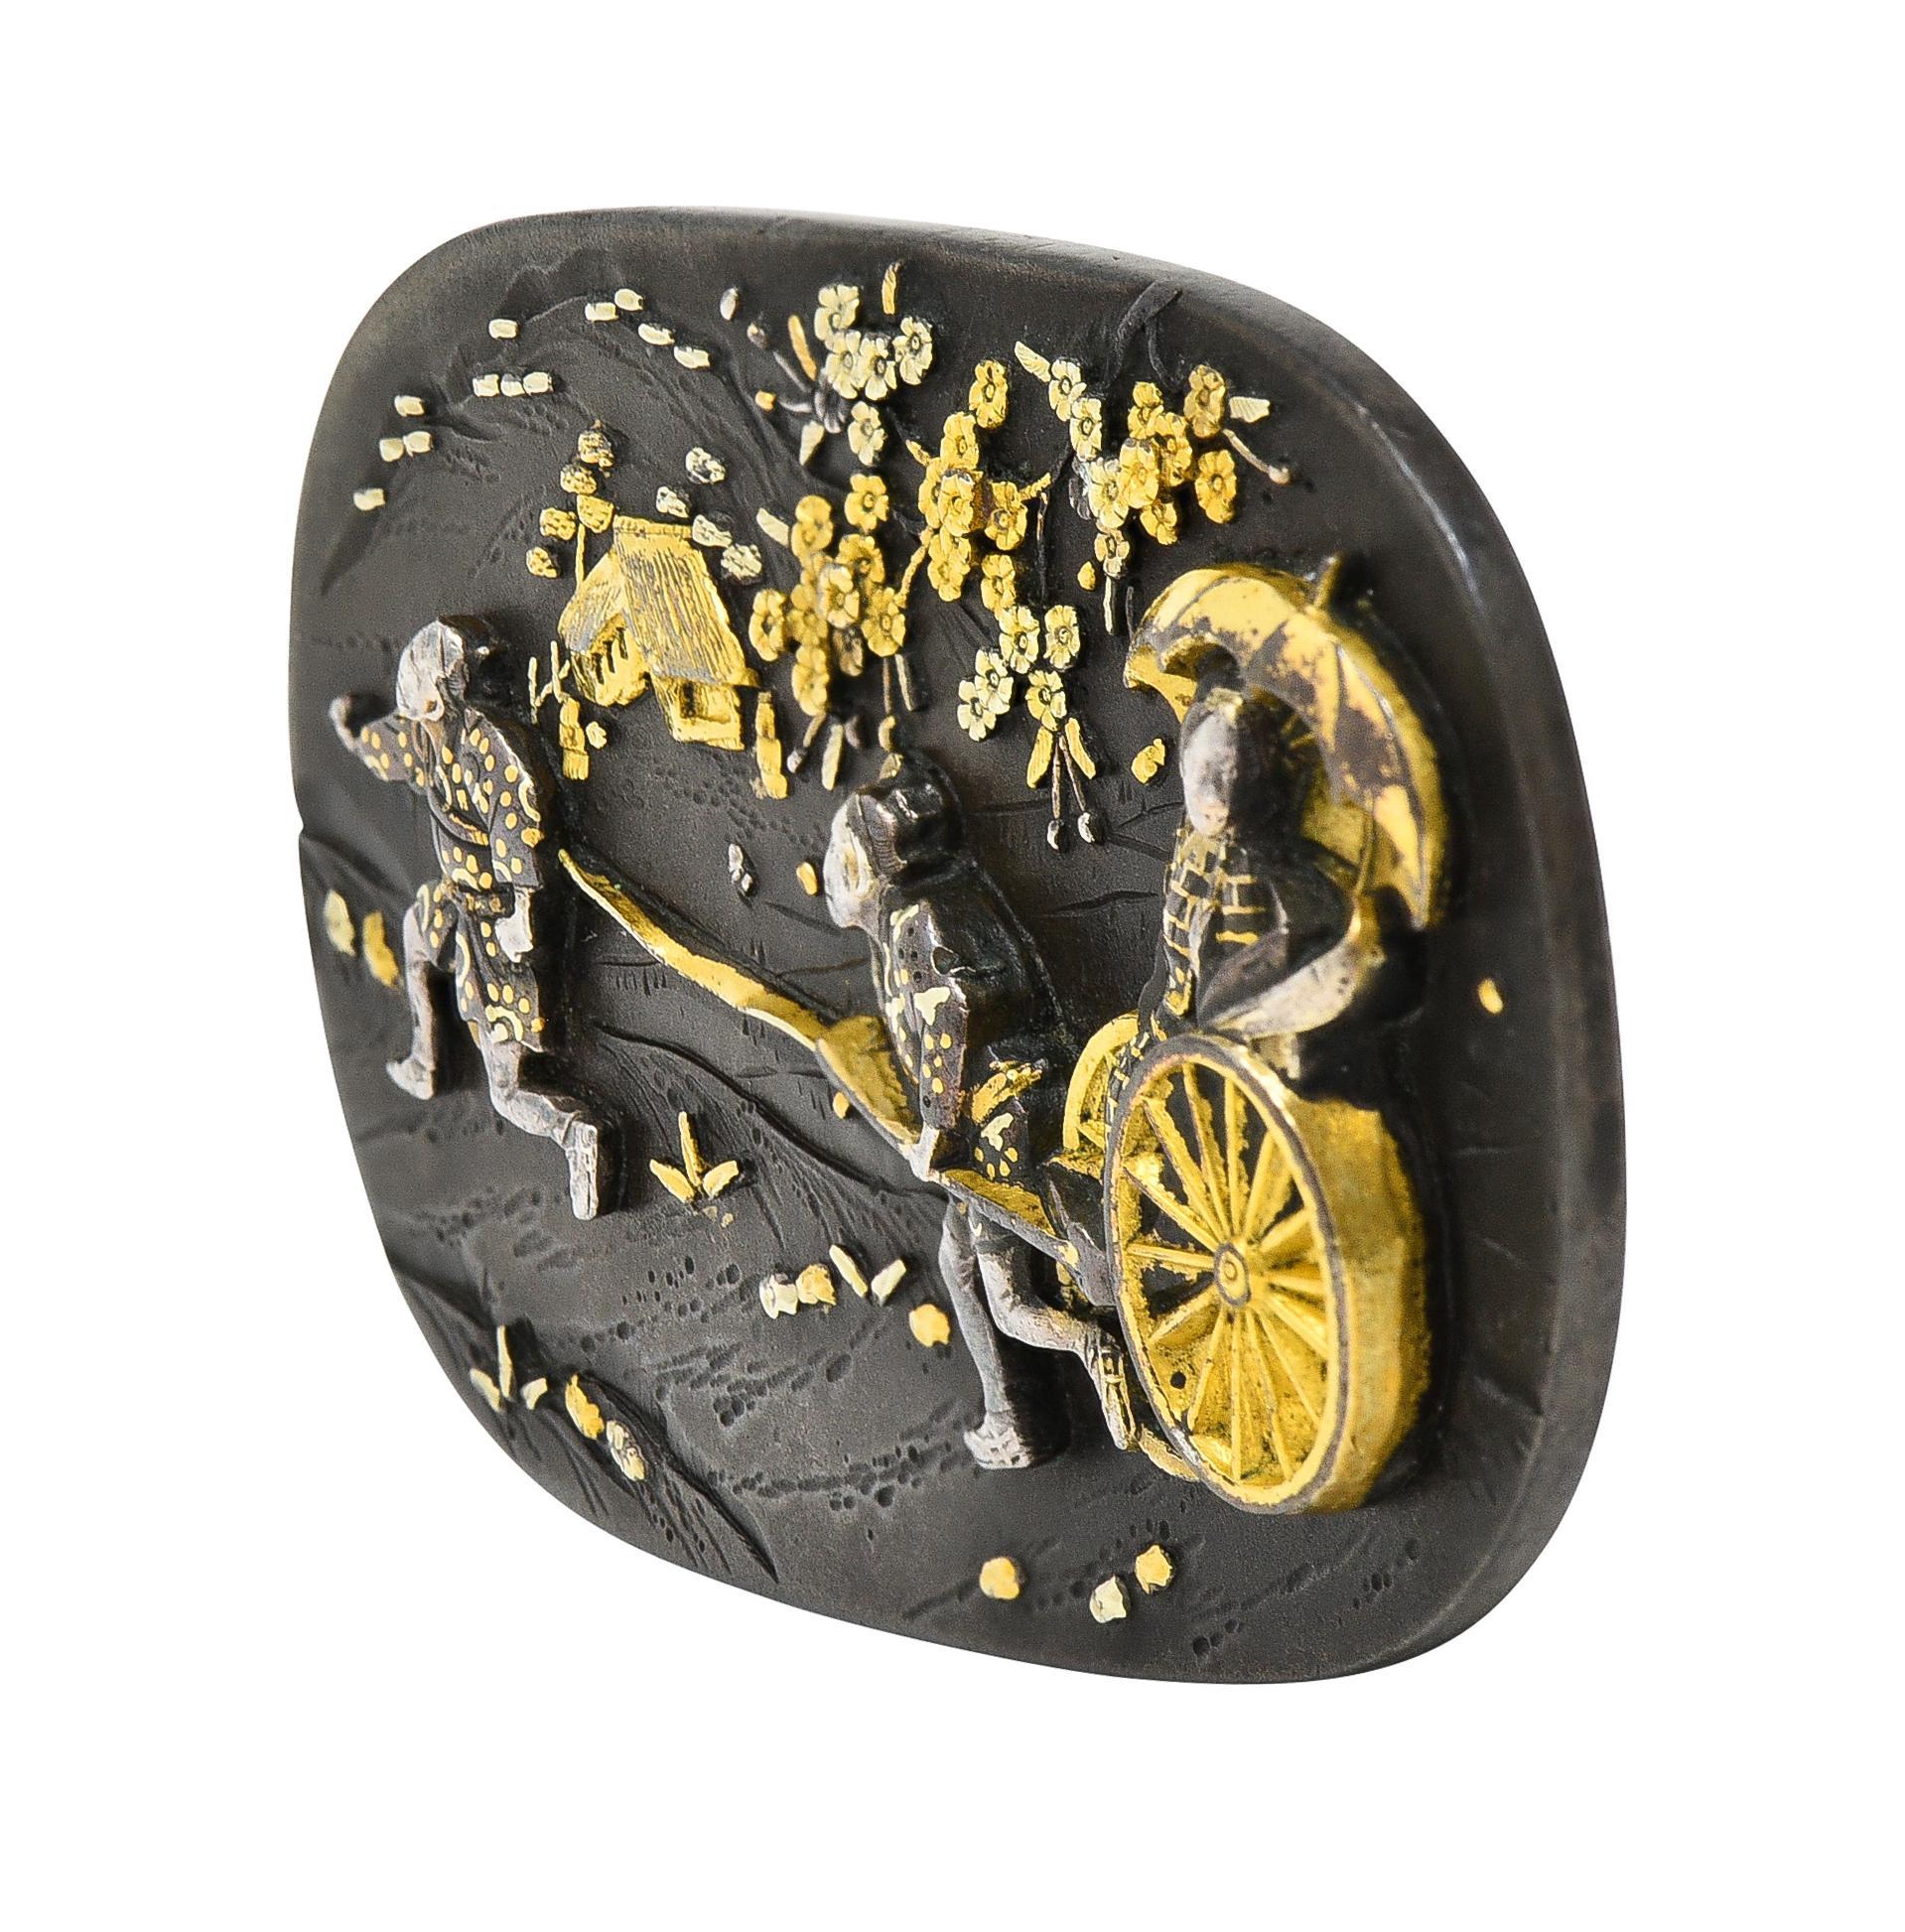 Designed as an oval-shaped form decorated with a raised cameo of Japanese scenery
Depicting cherry blossom trees, a house, and two men pulling a woman in a cart with an umbrella
Engraved and grooved with texture throughout - Shakudo style
Comprised